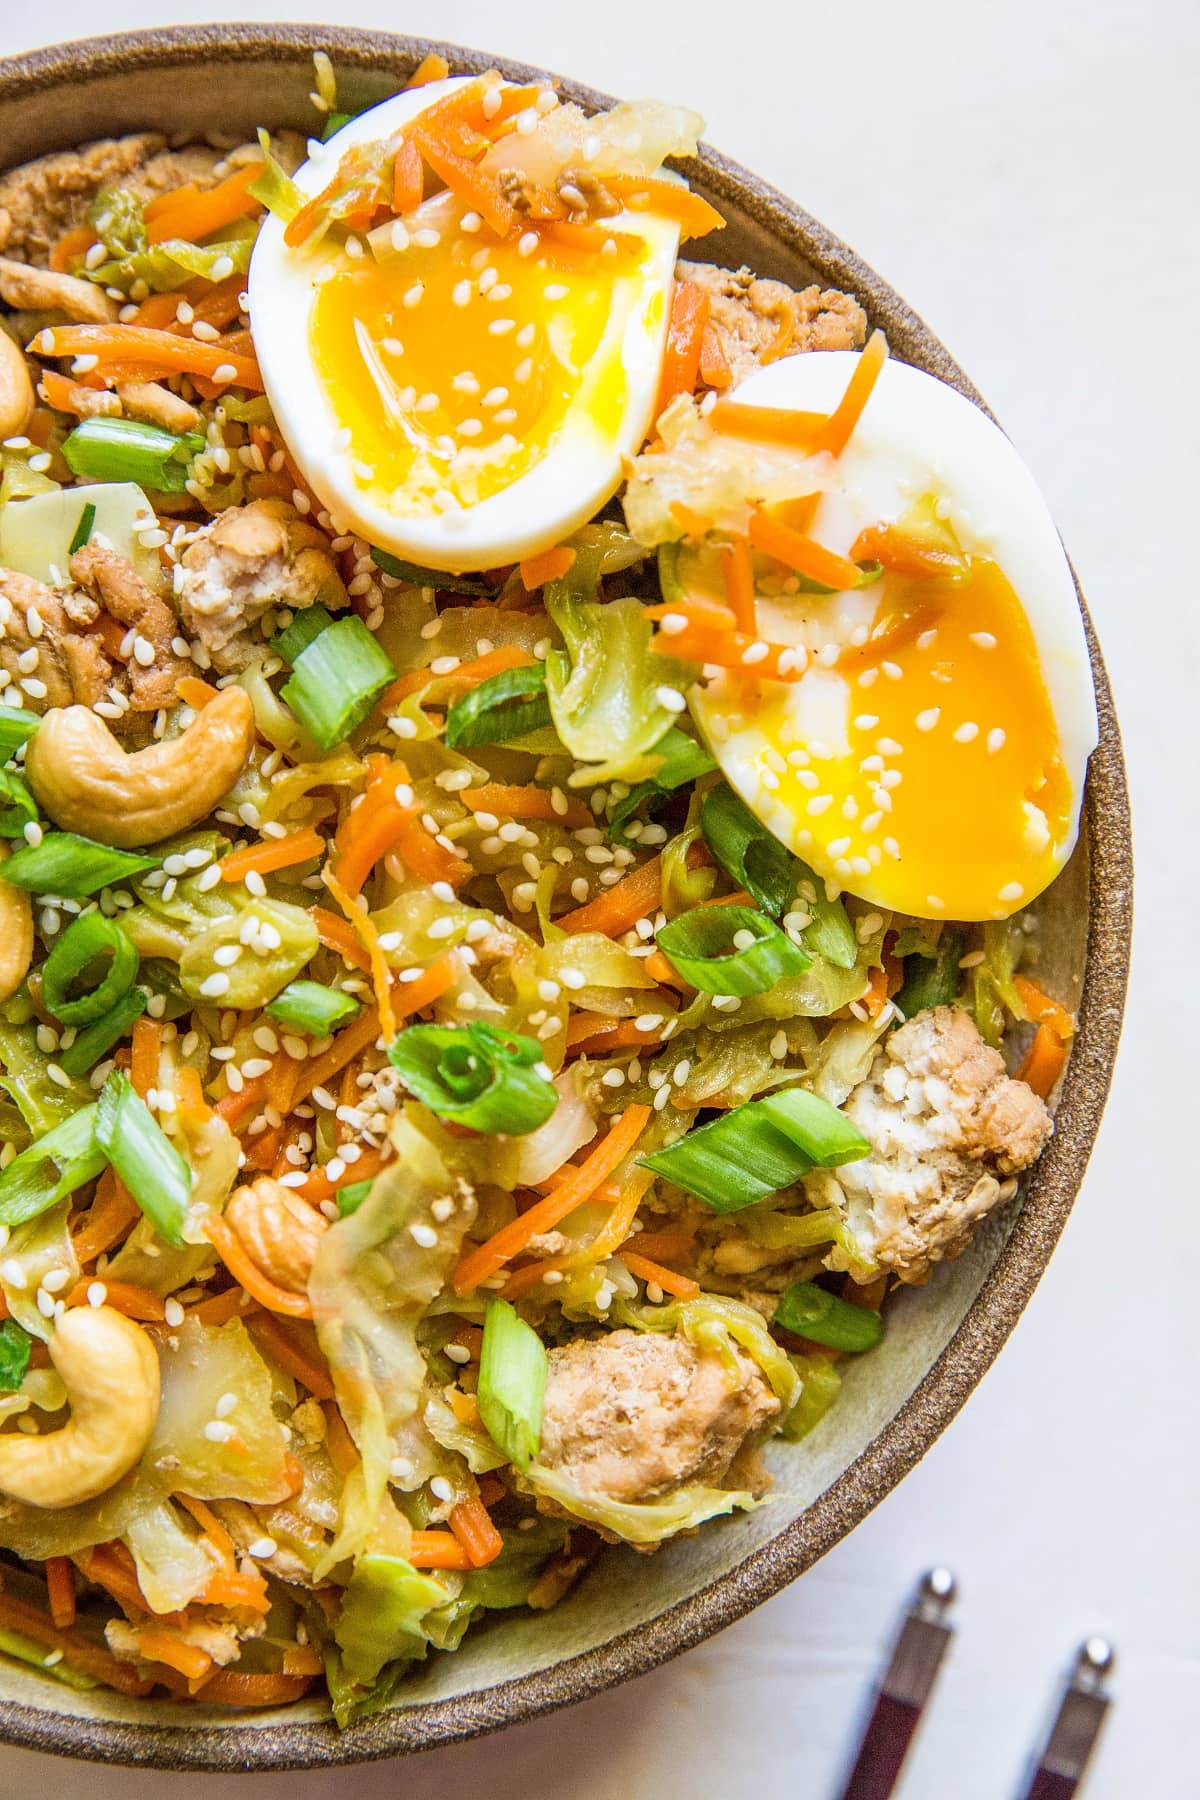 Ground Turkey Egg Roll Bowls - a deconstructed egg roll in a bowl - healthy dinner recipe that is paleo, low-carb, whole30 | TheRoastedRoot.net